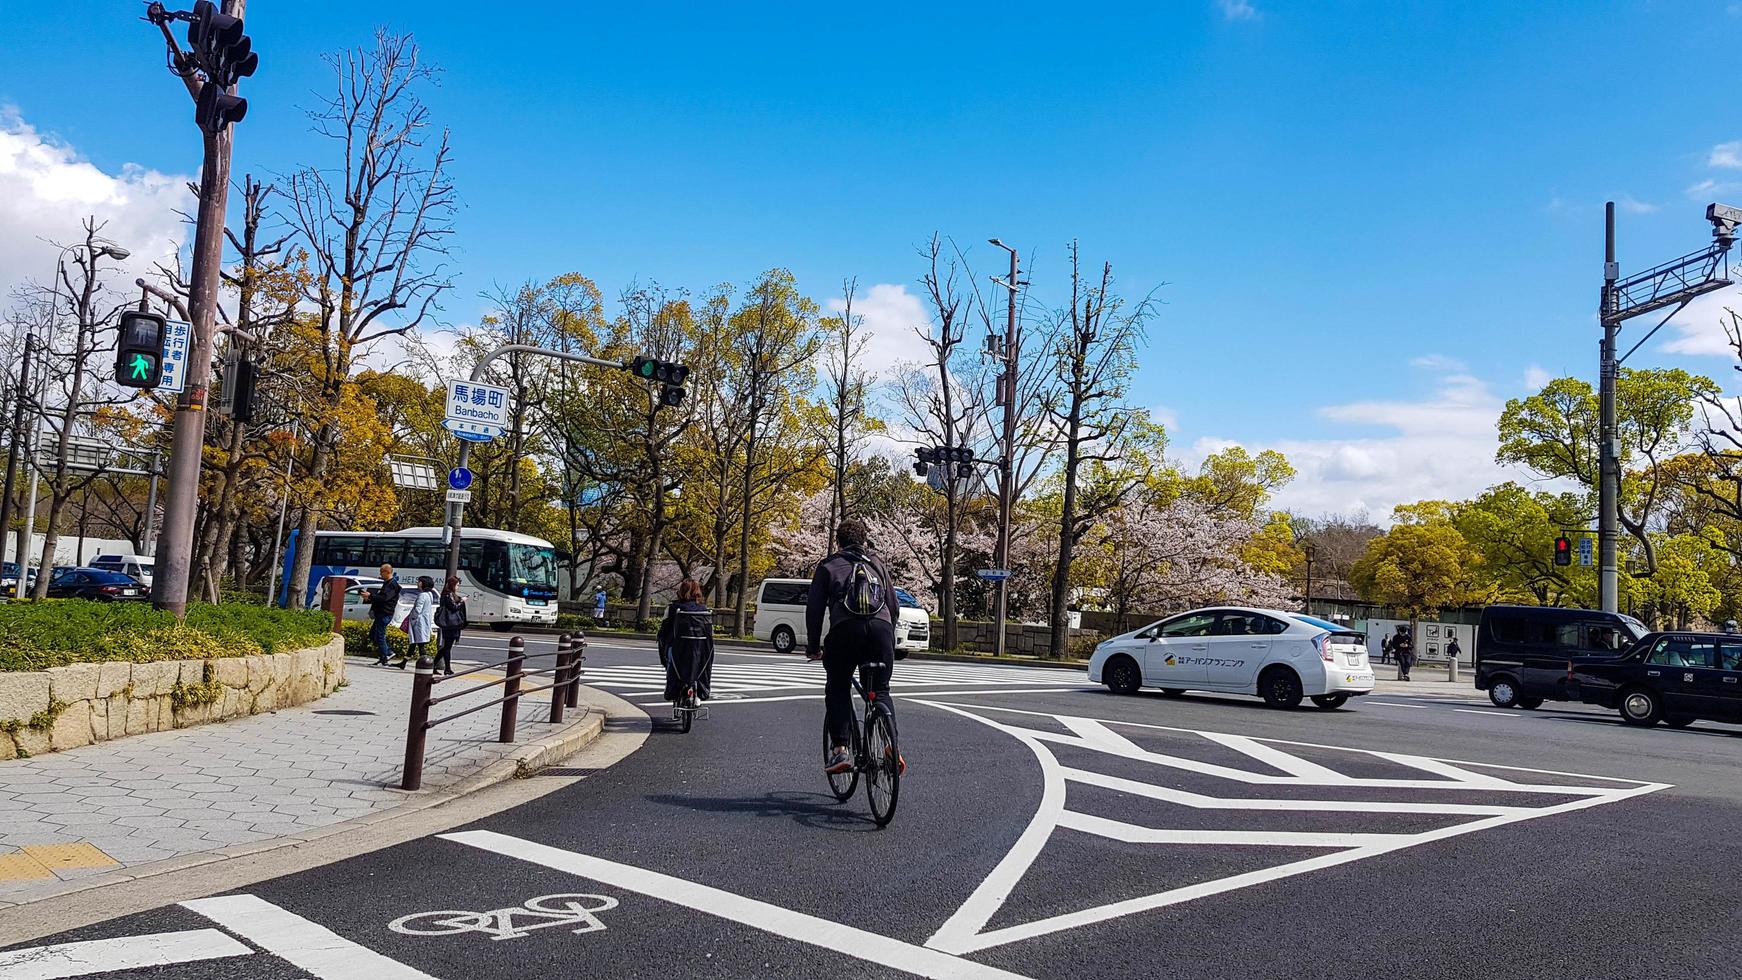 Osaka, Japan on April 10, 2019. Situation at a pedestrian crossing, where a white sporty car stops when a couple riding a bicycle crosses at the crossing. photo